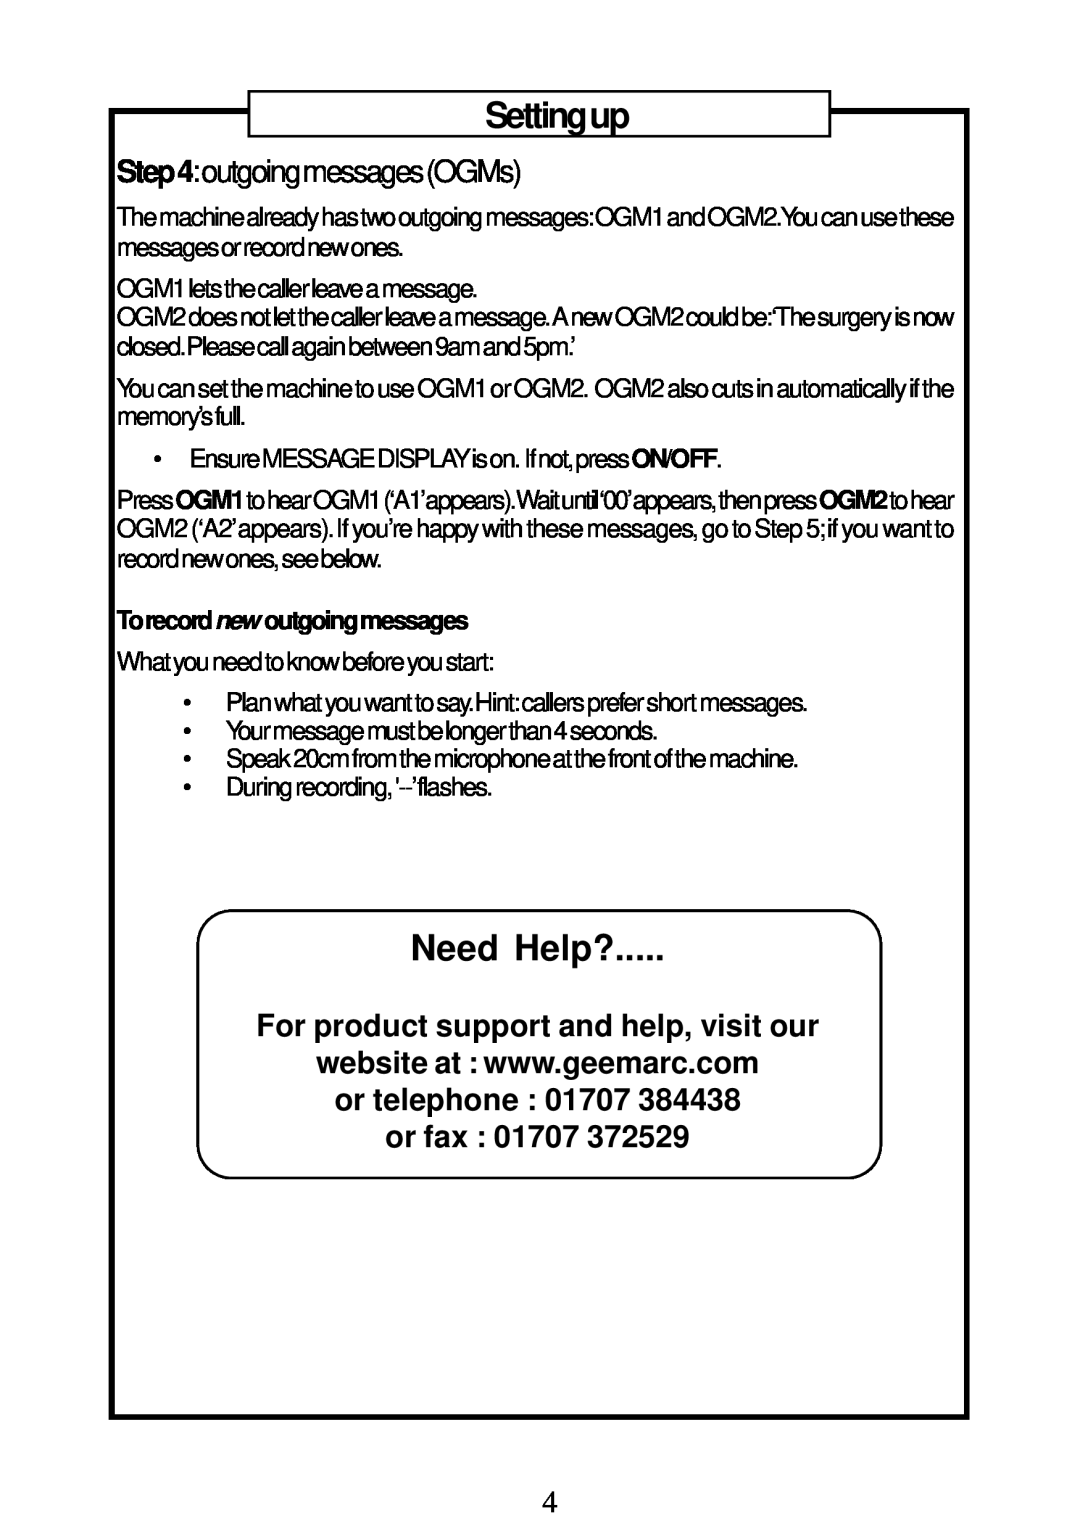 Geemarc RP7510 Need Help?, outgoingmessagesOGMs, For product support and help, visit our, Torecordnew outgoingmessages 